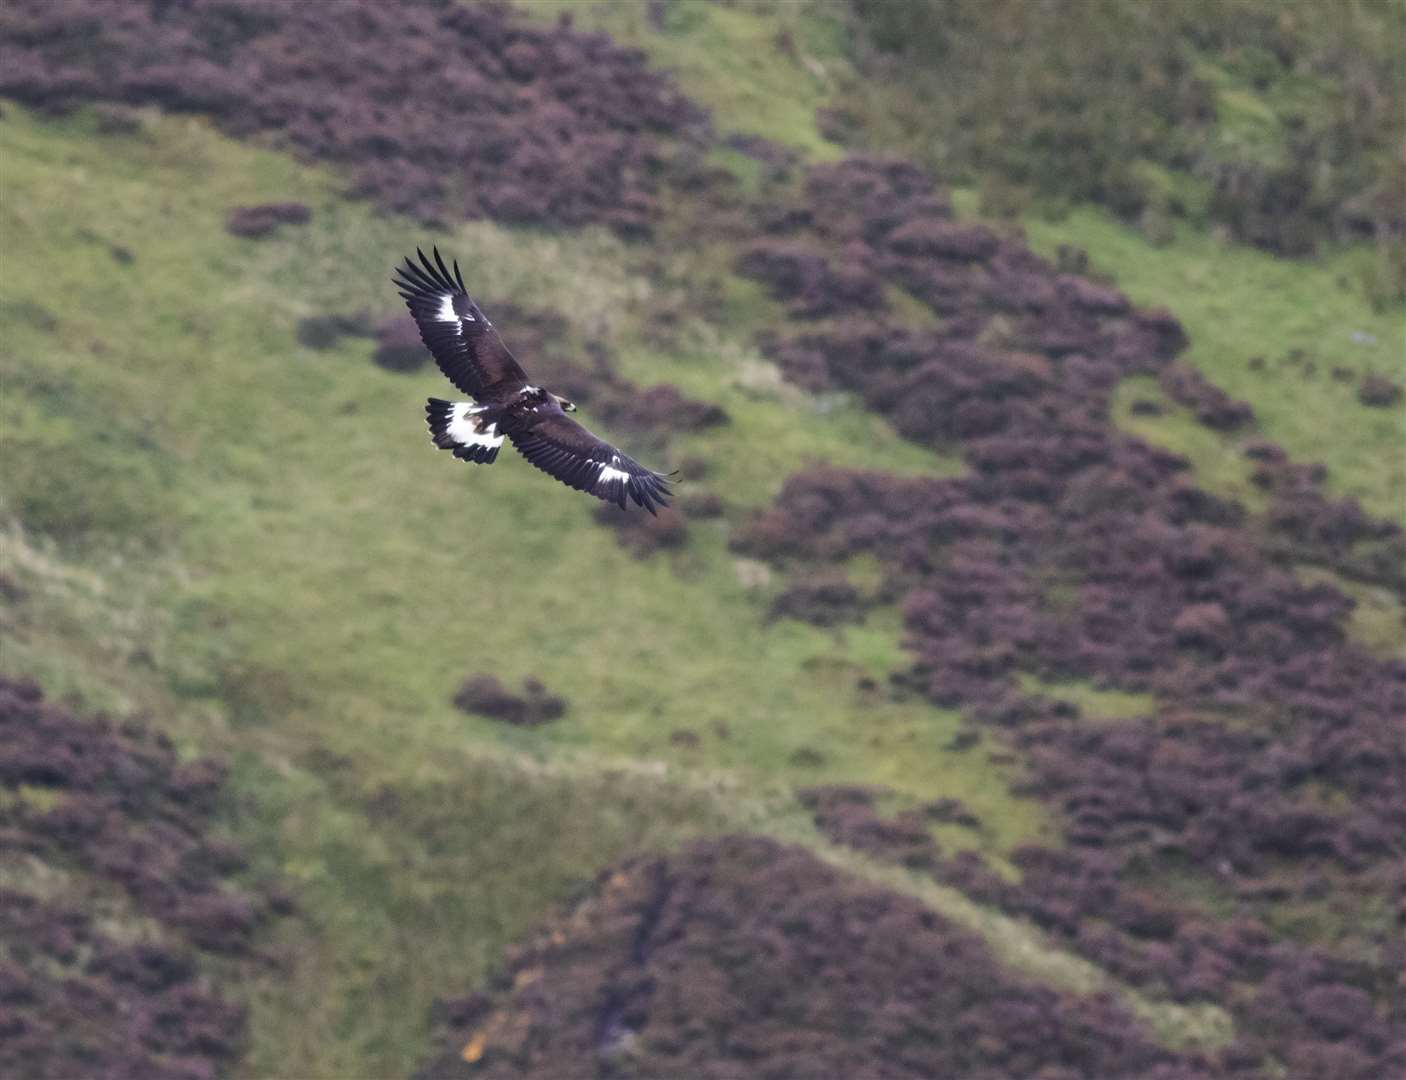 Conservationists said the population has reached new heights (South of Scotland Golden Eagle Project/PA)